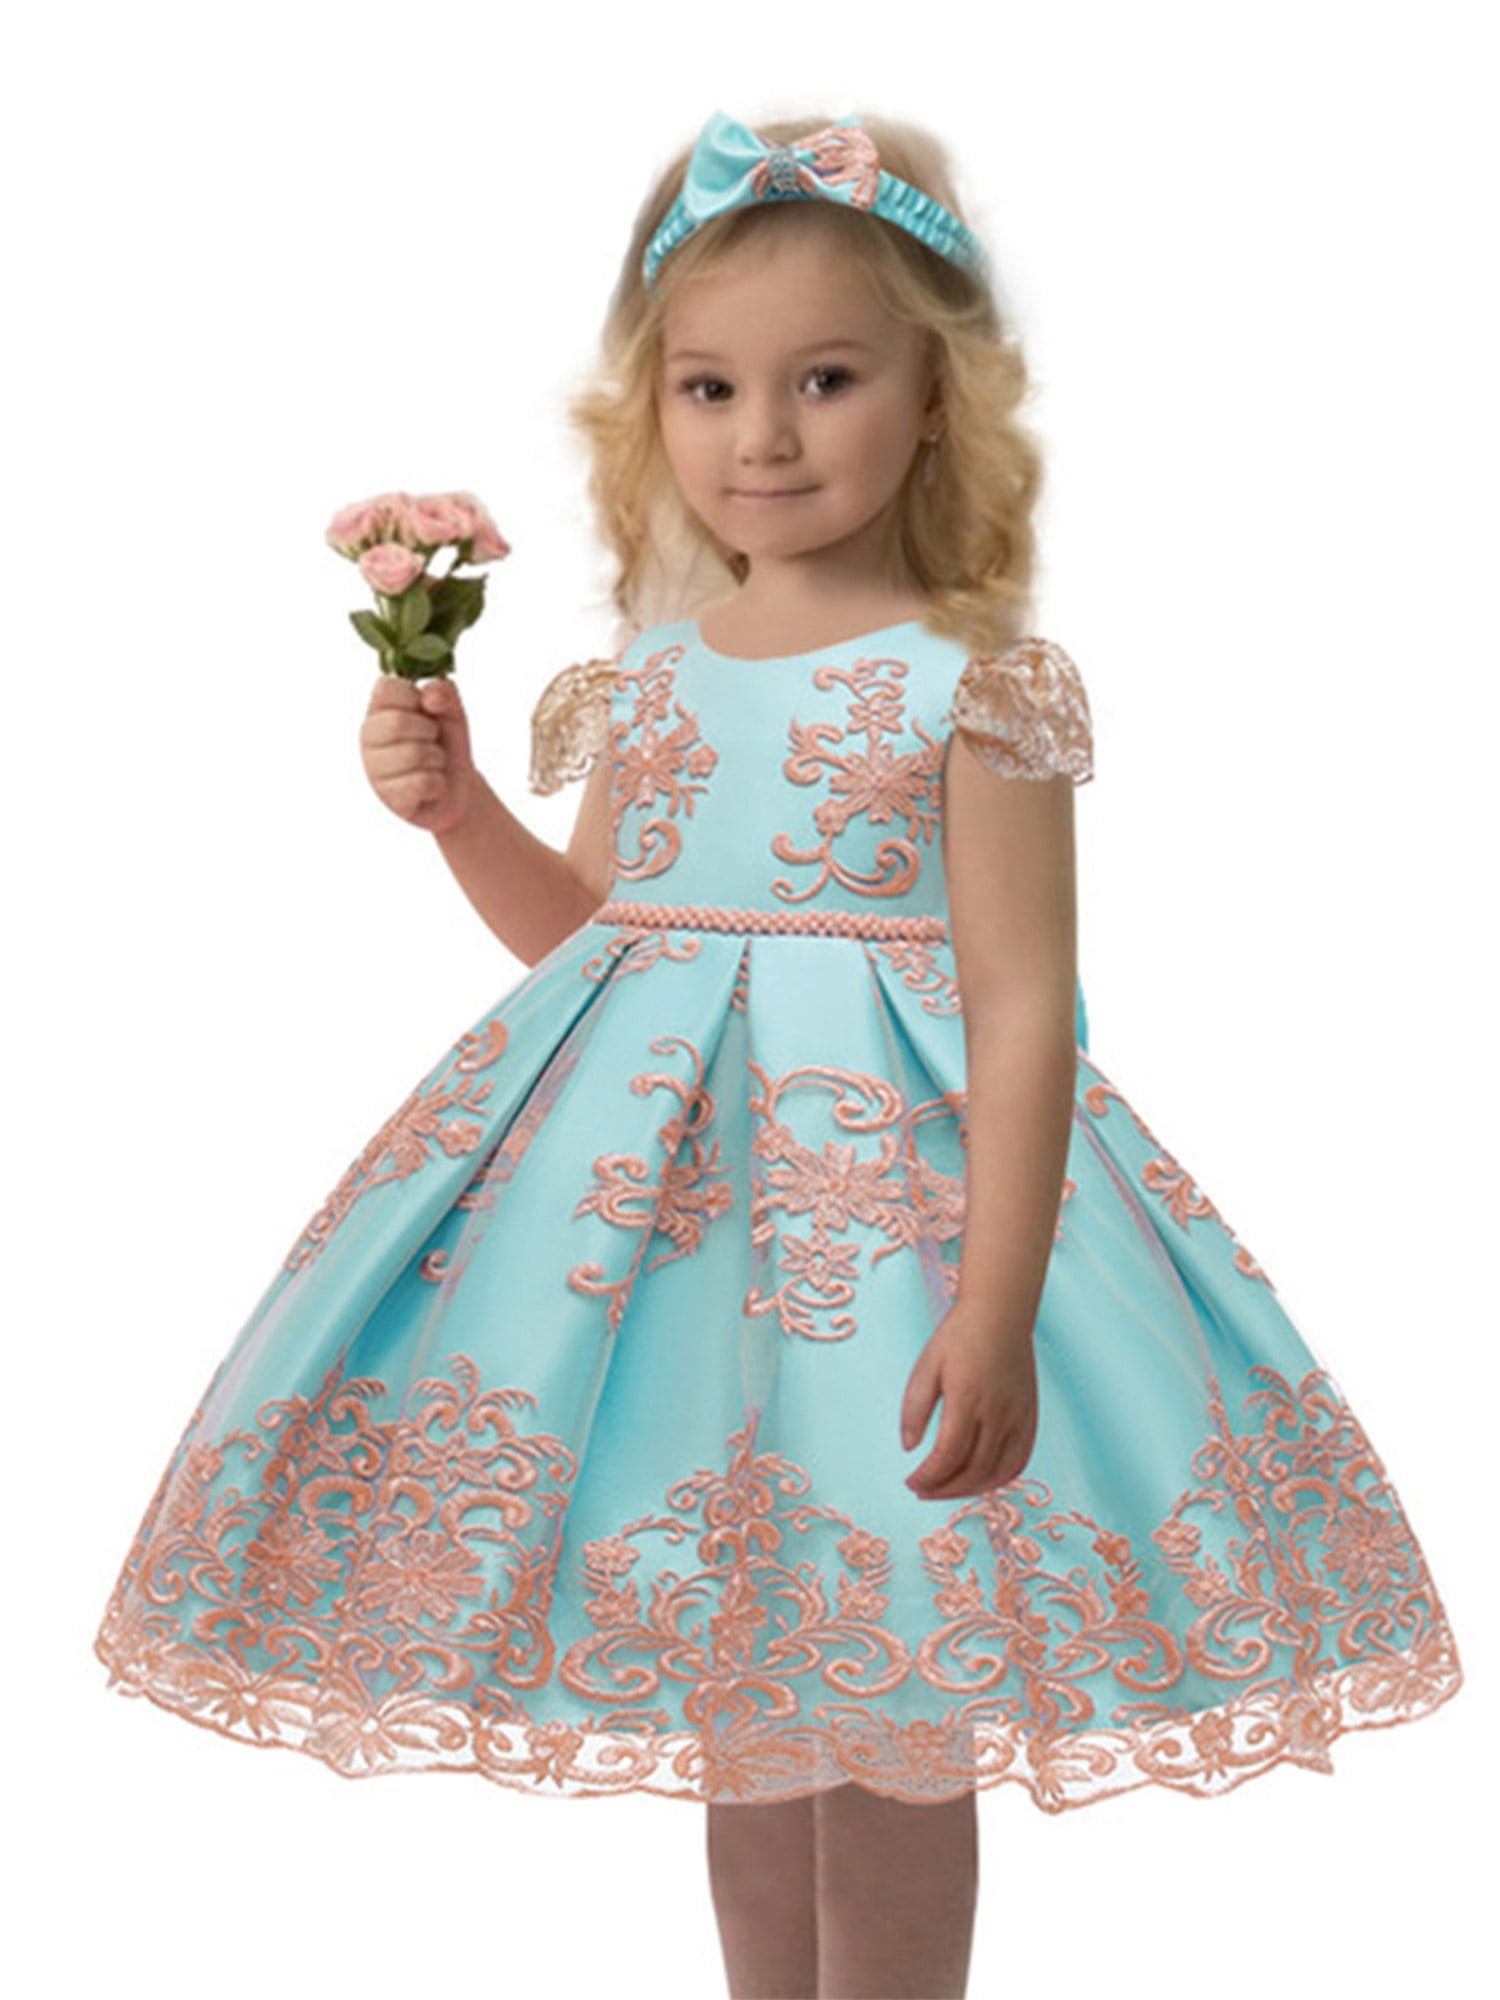 discount 83% KIDS FASHION Dresses Party NoName formal dress Red 12-18M 